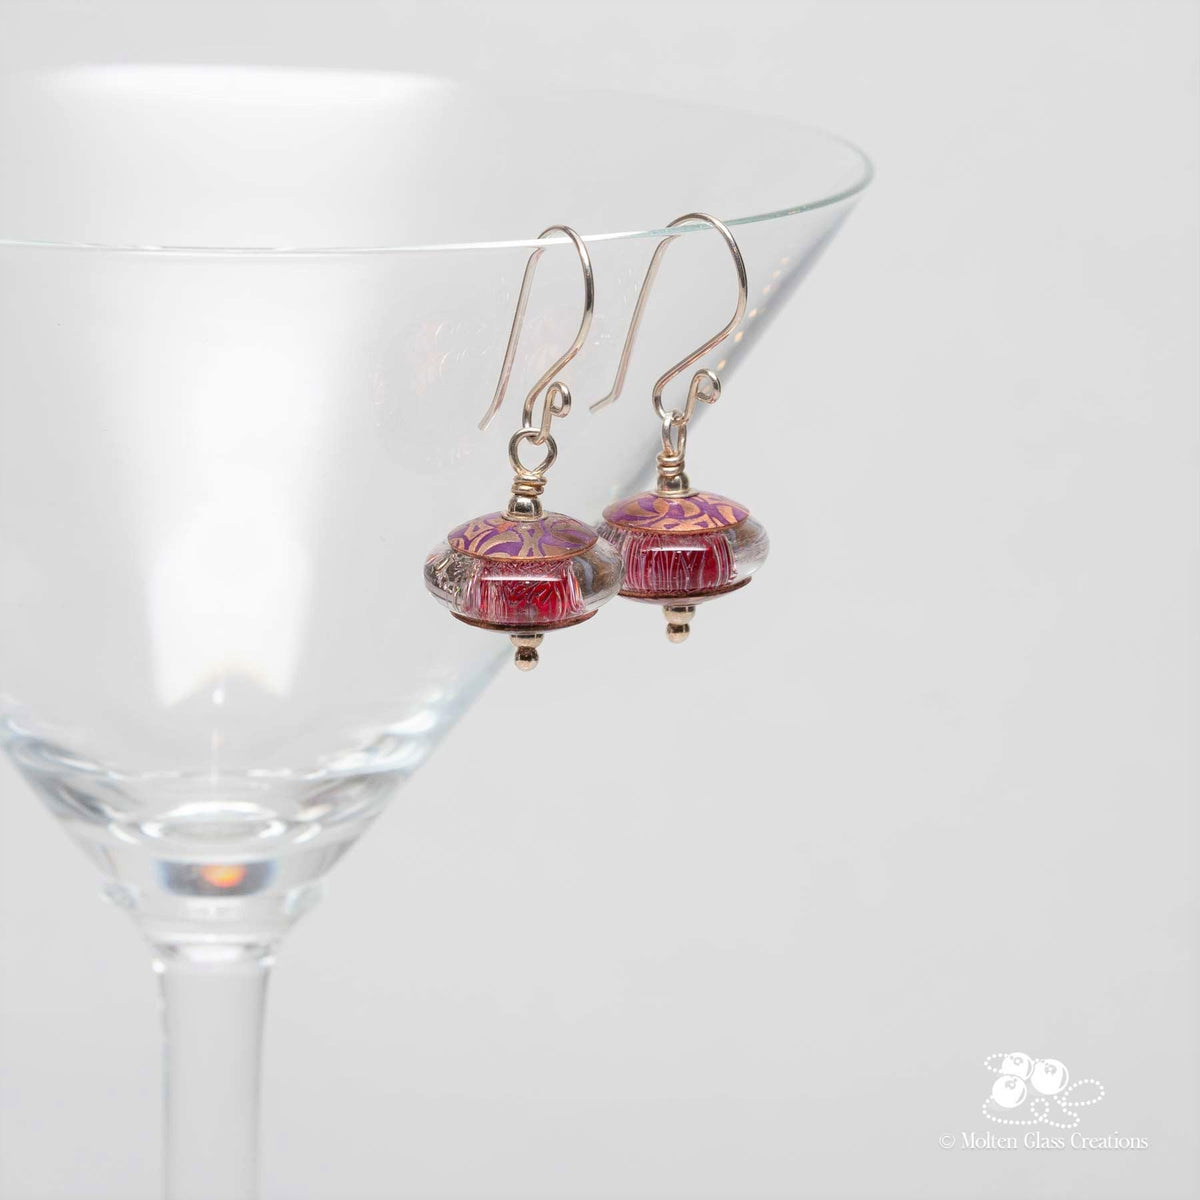 Sparkly Pink Dichroic Earrings - Molten Glass Creations